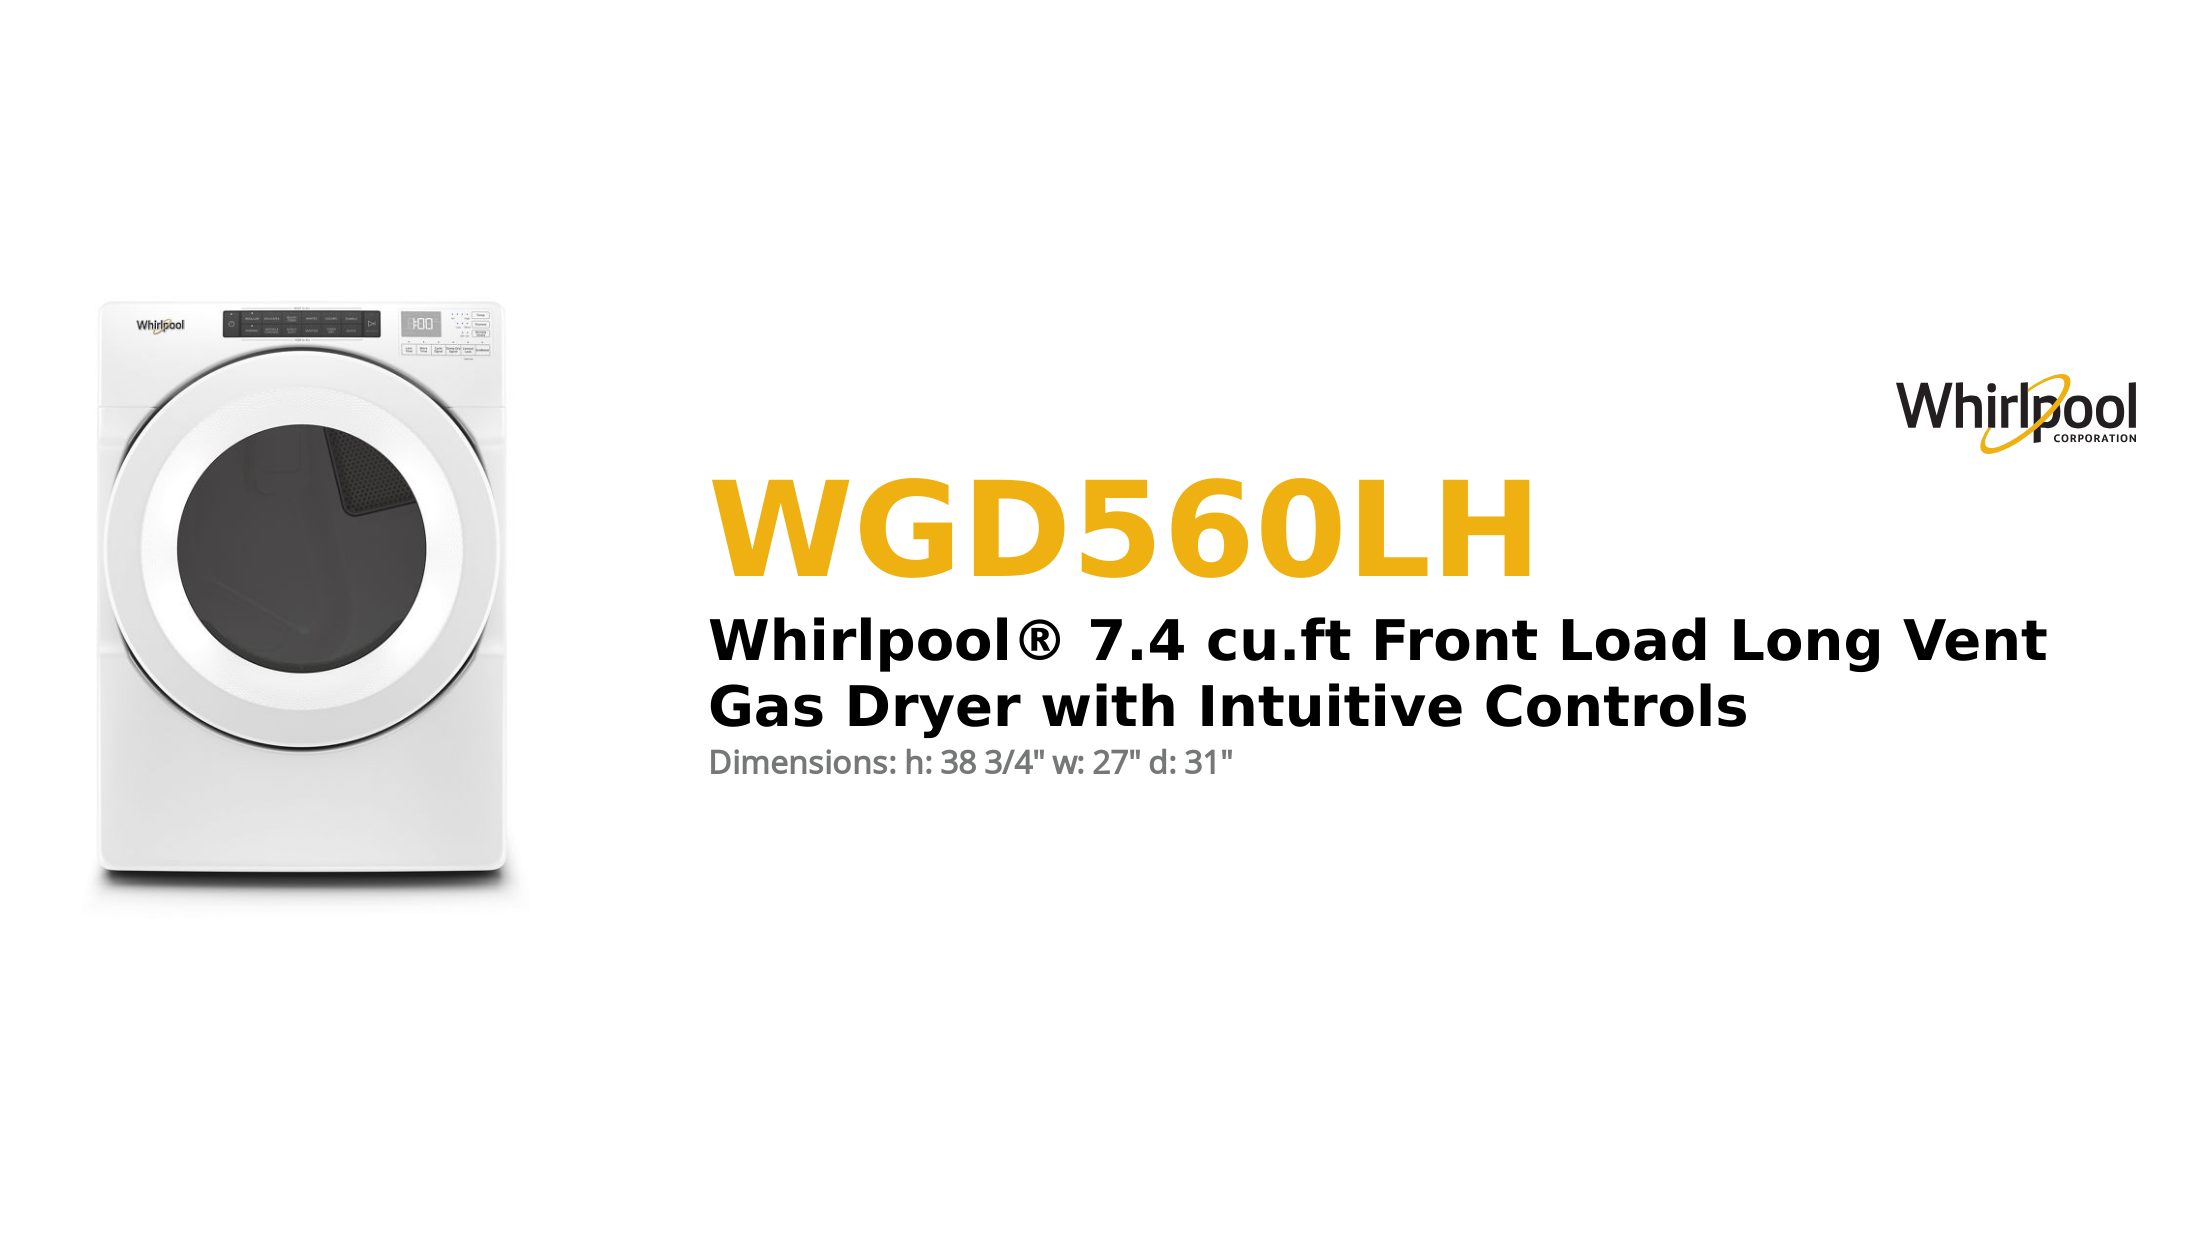 WGD560LH Product Brief